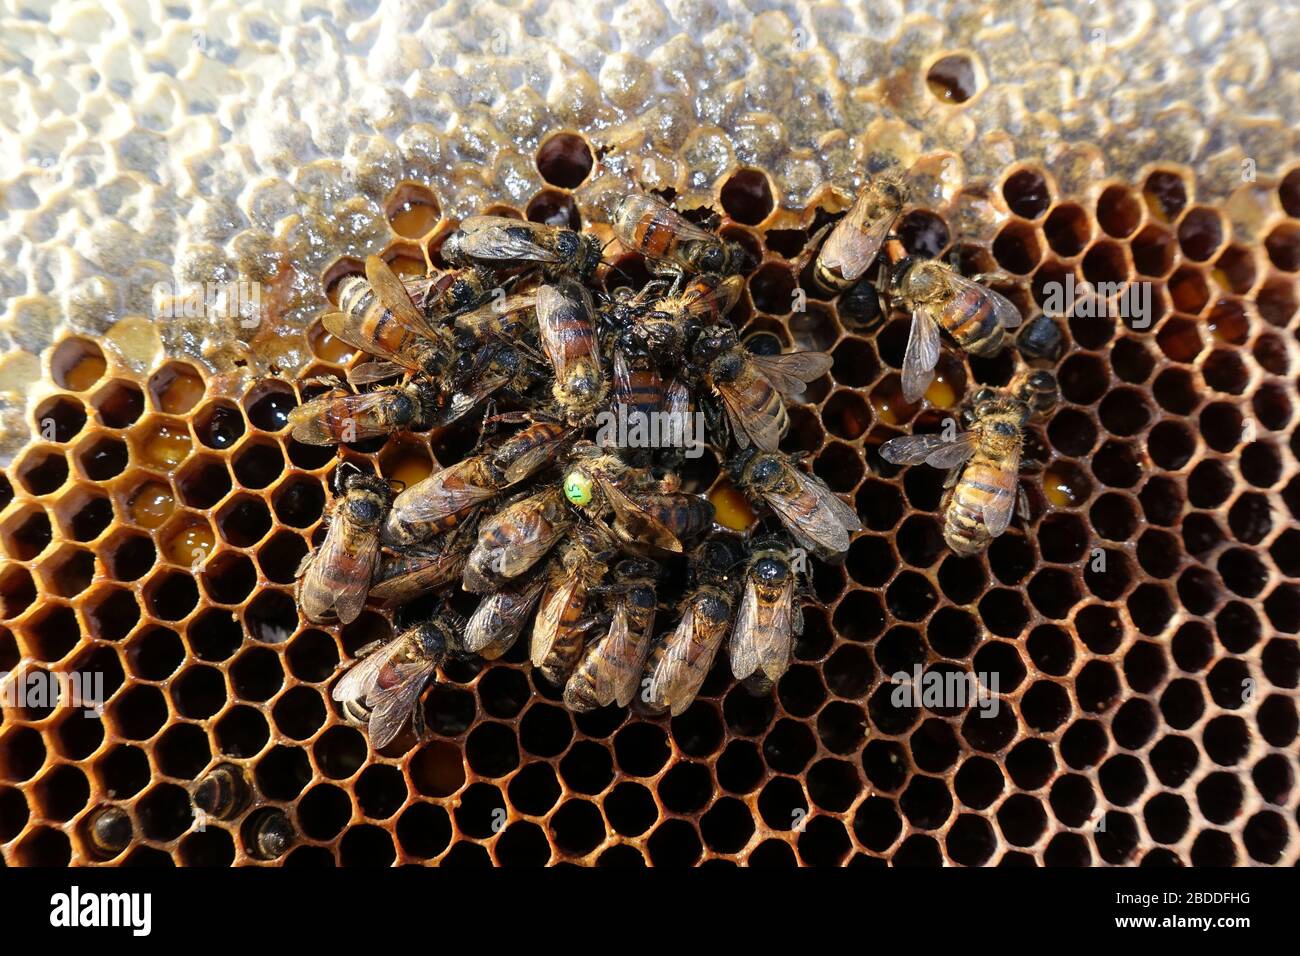 29.12.2019, Berlin, Berlin, Germany - Dead honeybees and marked queen bee on a brood comb. 00S191229D317CAROEX.JPG [MODEL RELEASE: NOT APPLICABLE, PRO Stock Photo